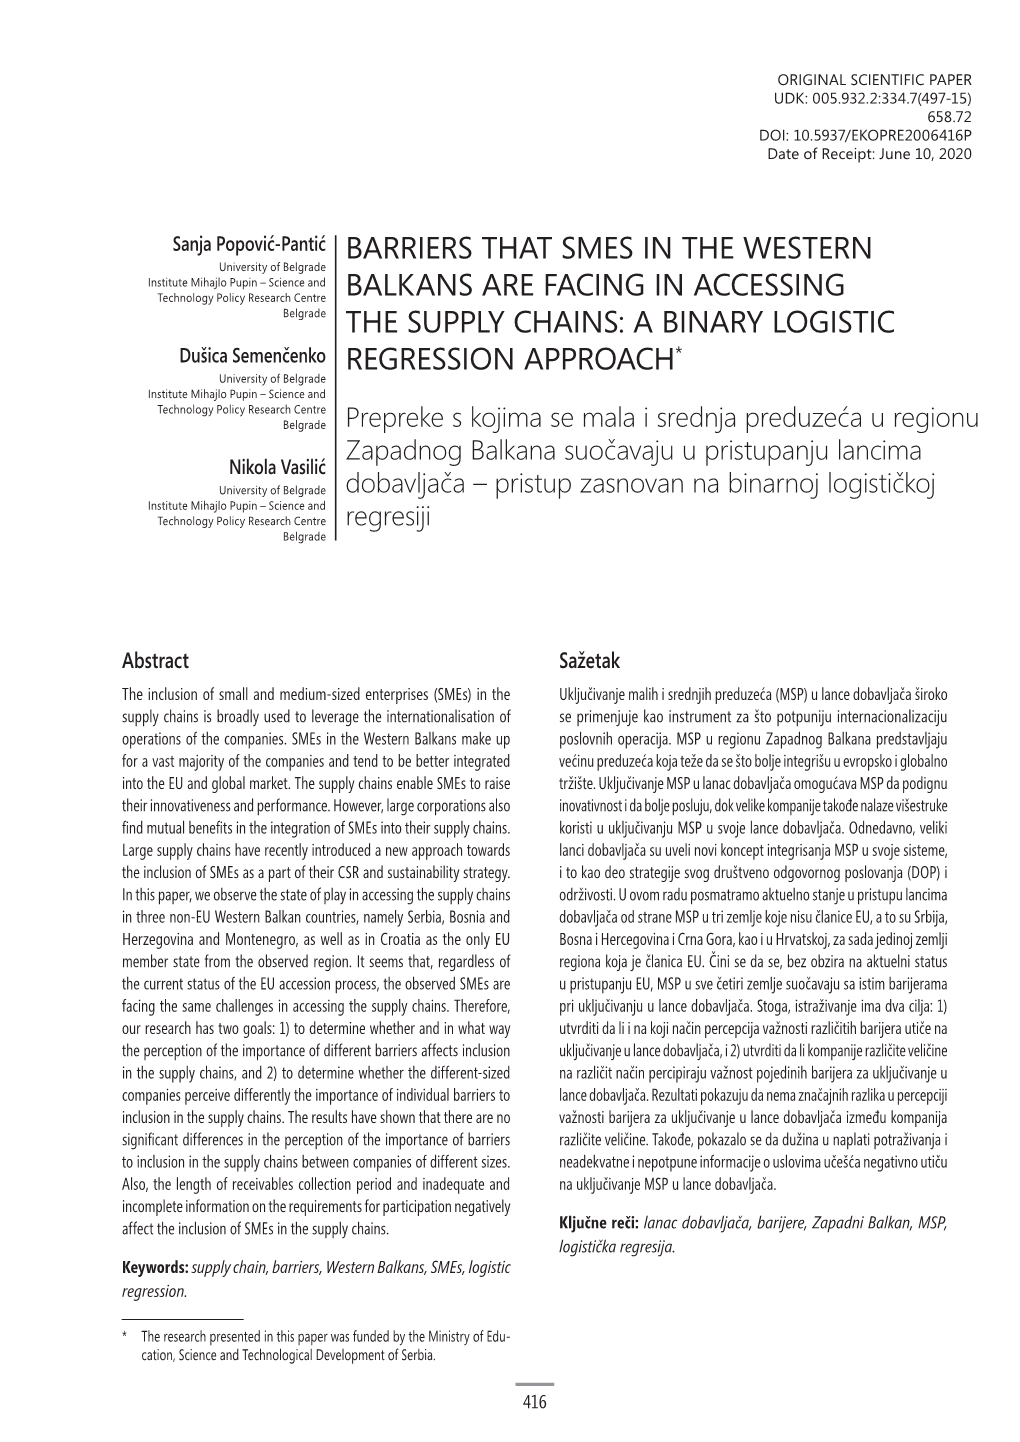 Barriers That Smes in the Western Balkans Are Facing in Accessing the Supply Chains: a Binary Logistic Regression Approach*